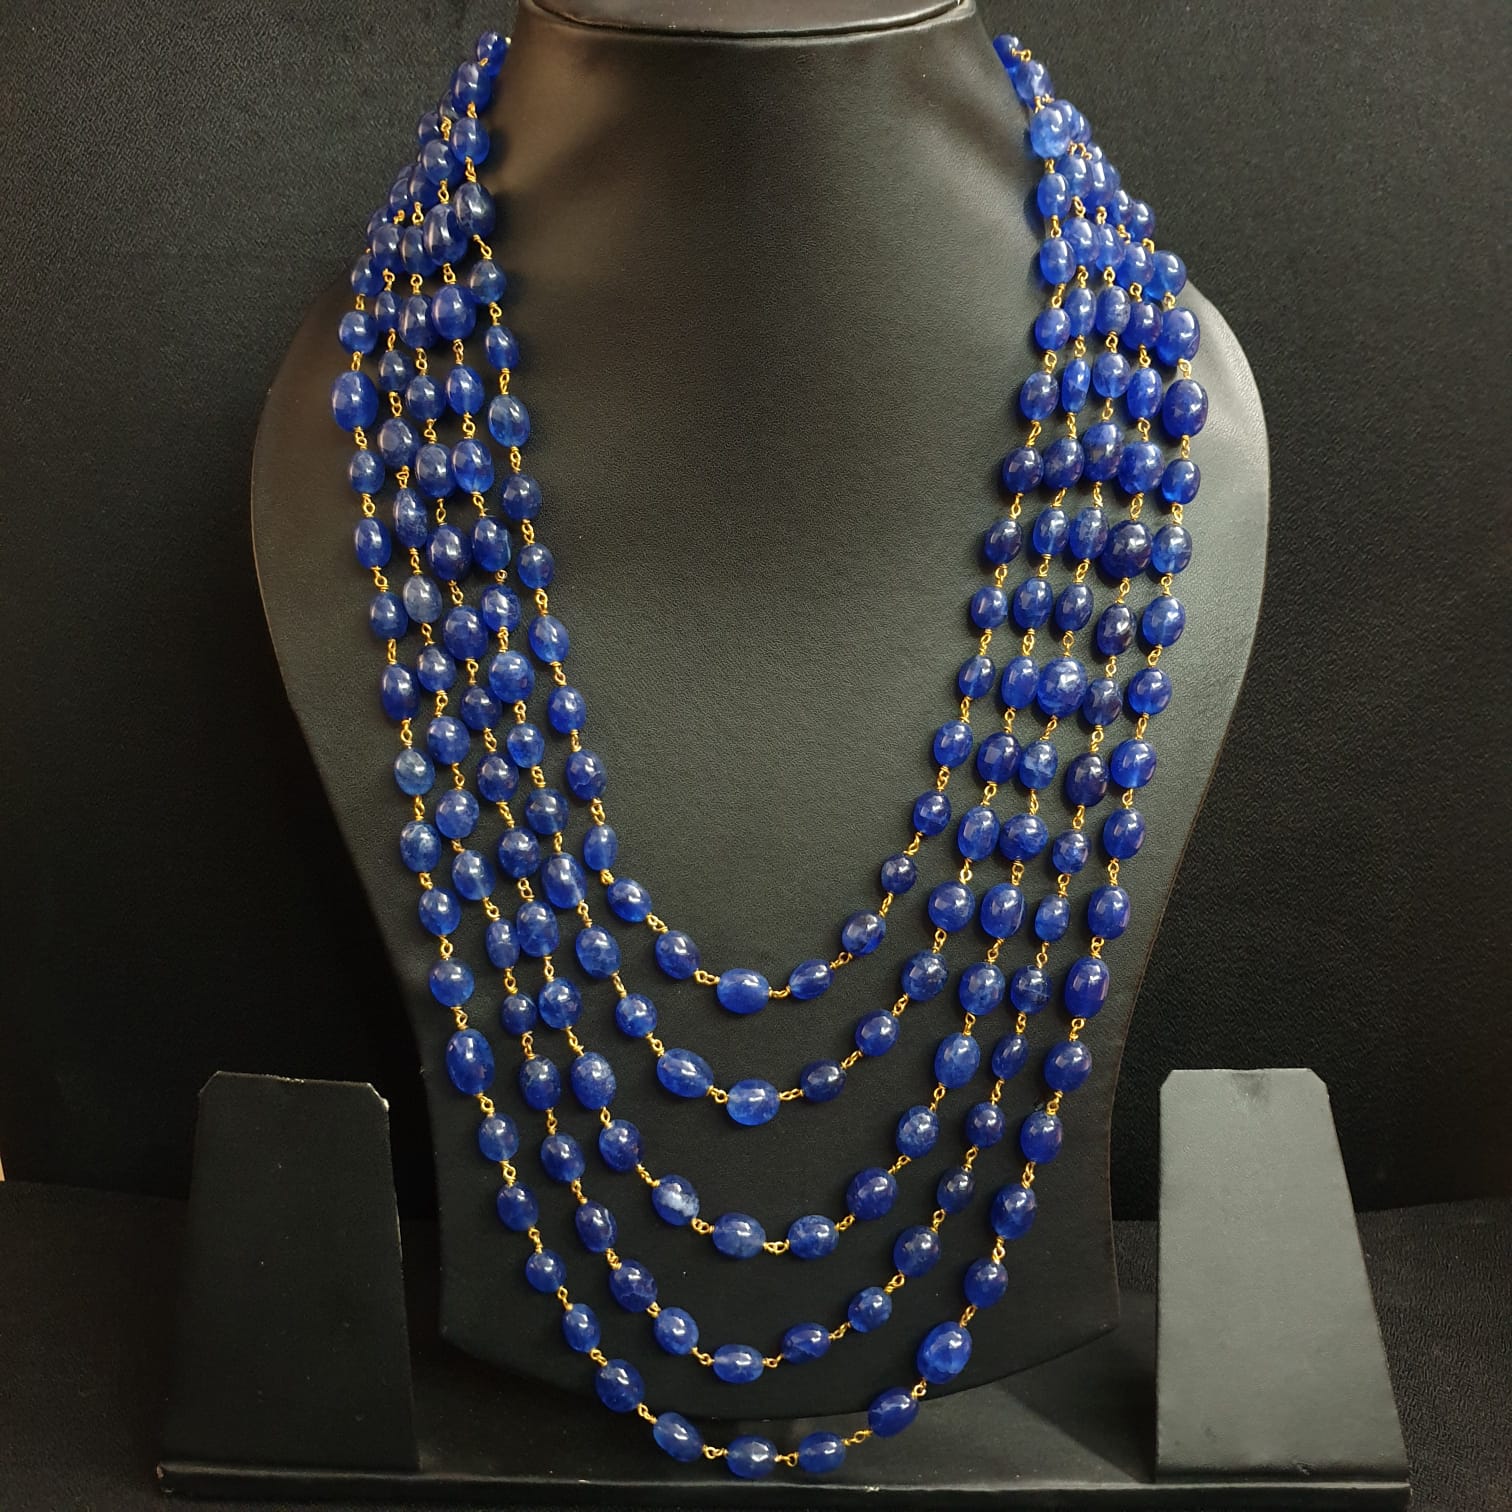 Five Layered Blue Stone Necklace